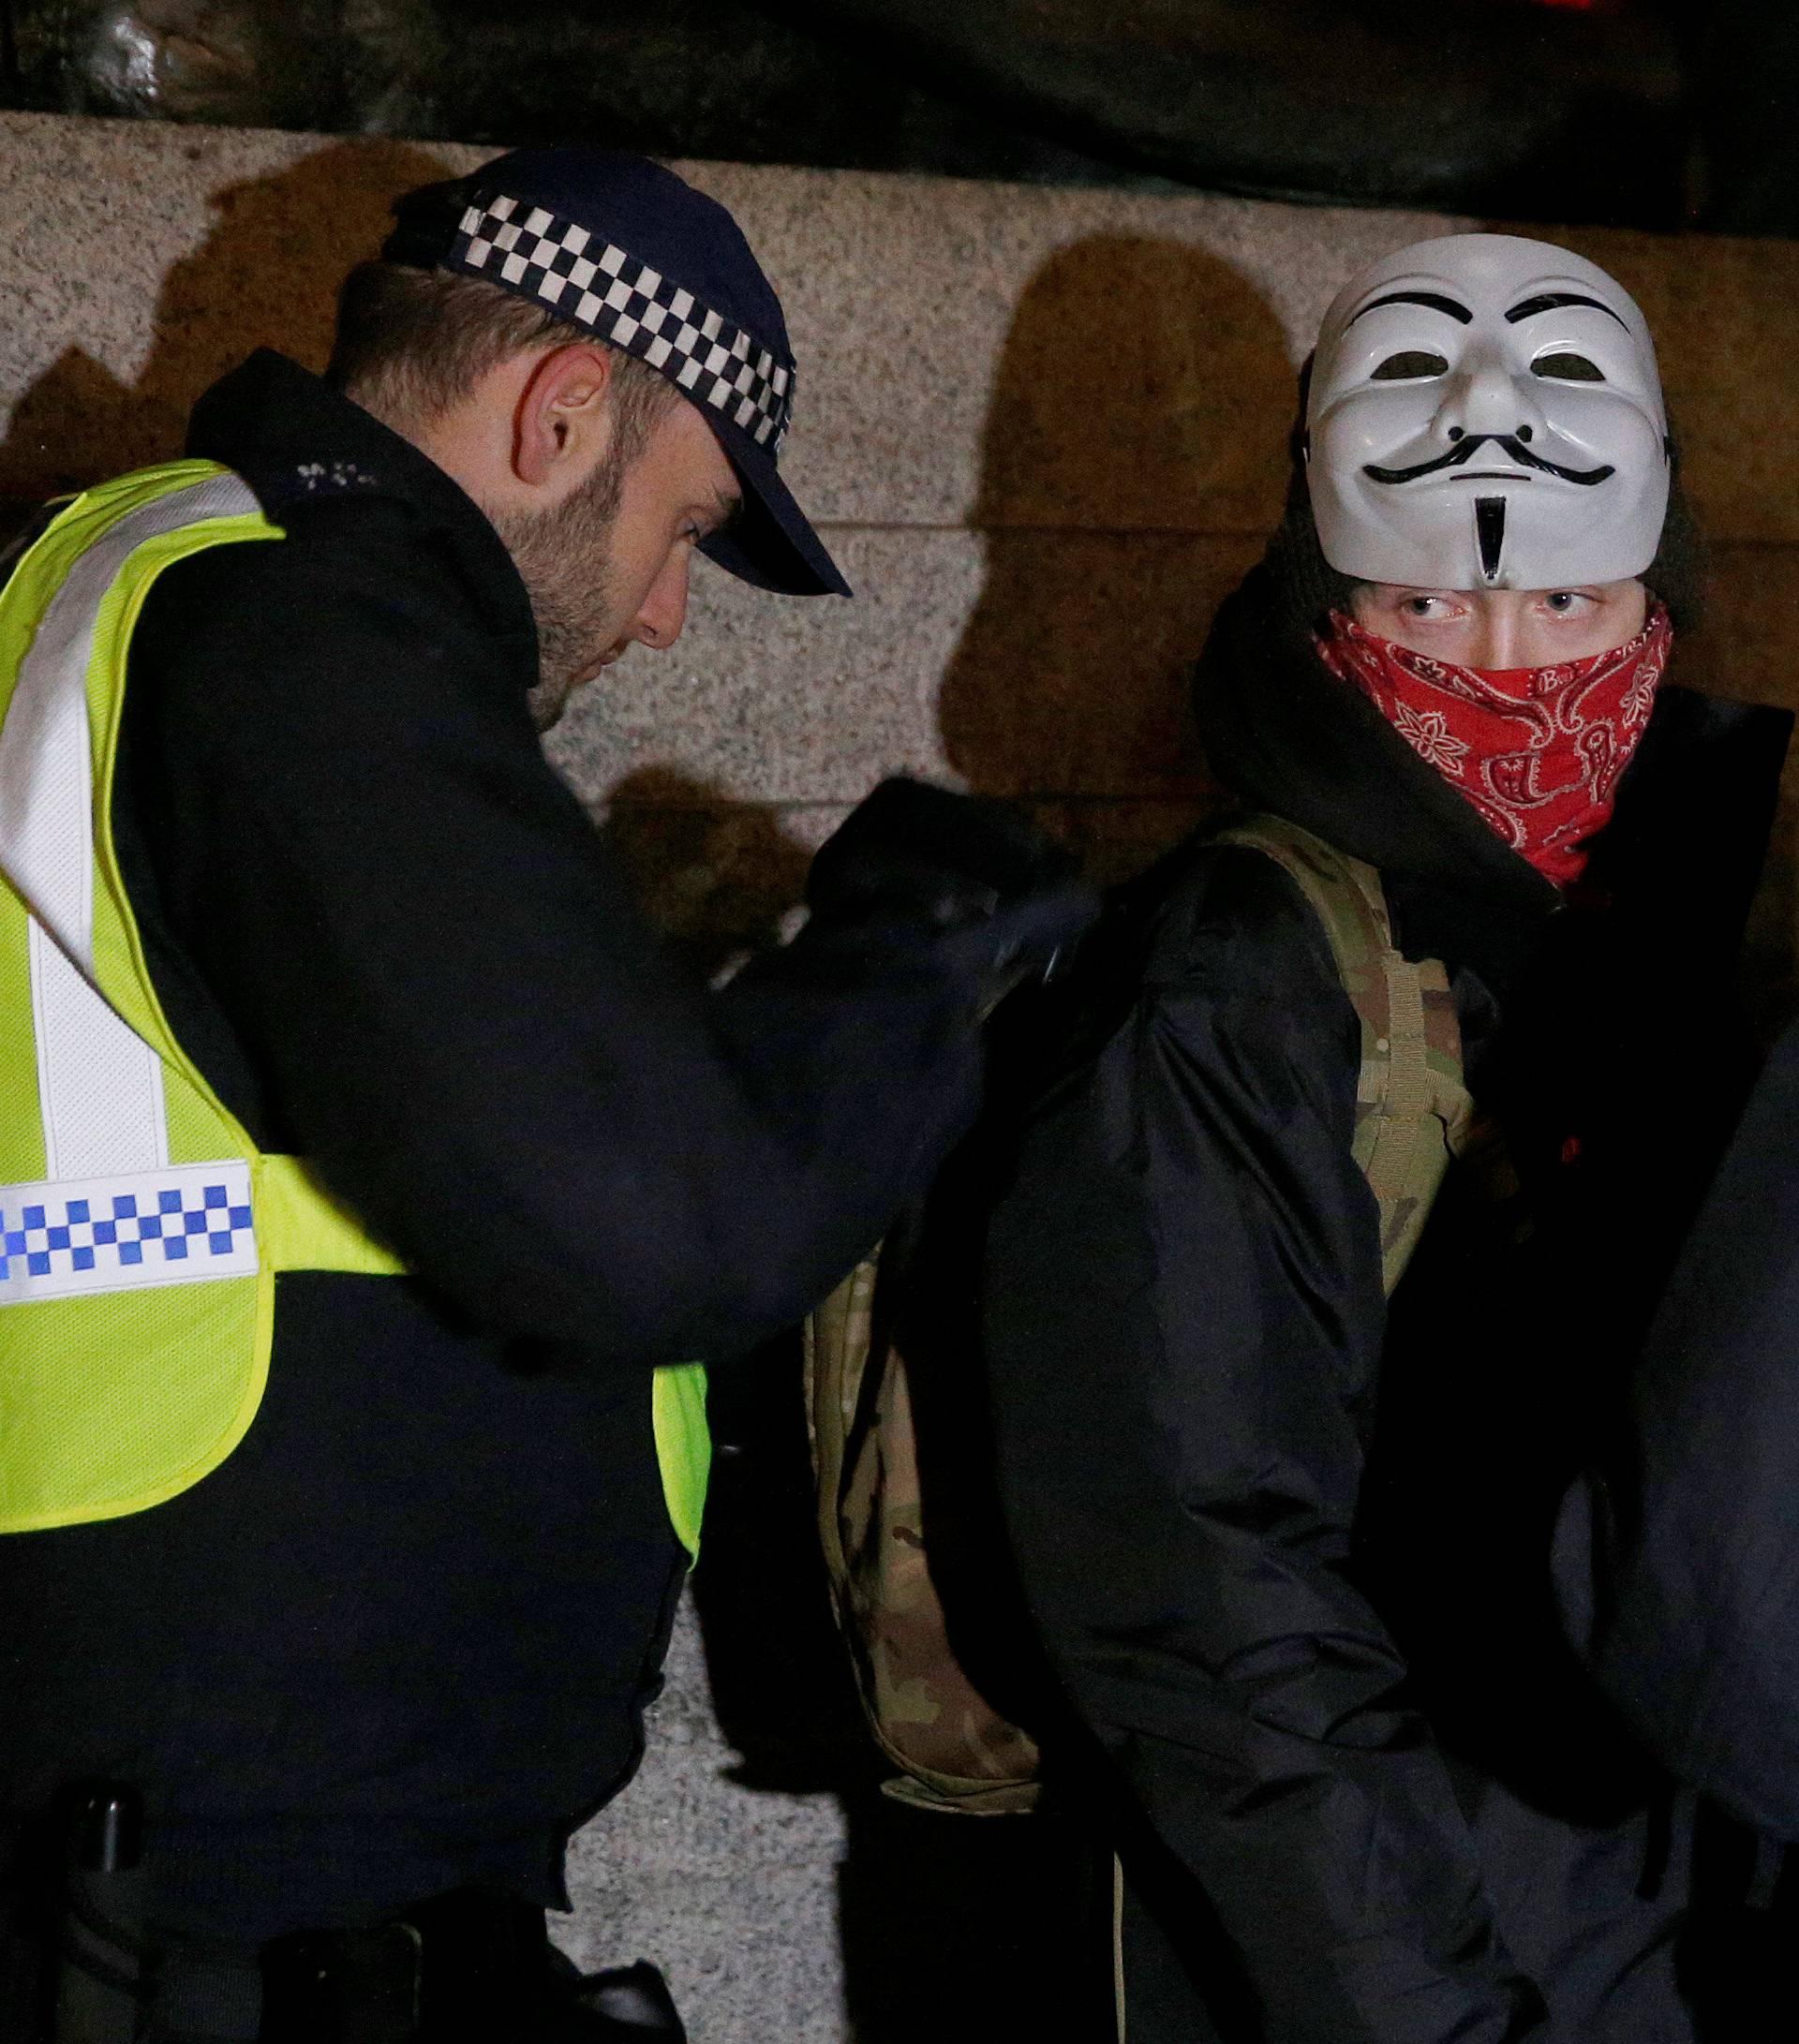 Police officers search a protester during the "Million Mask March" in London